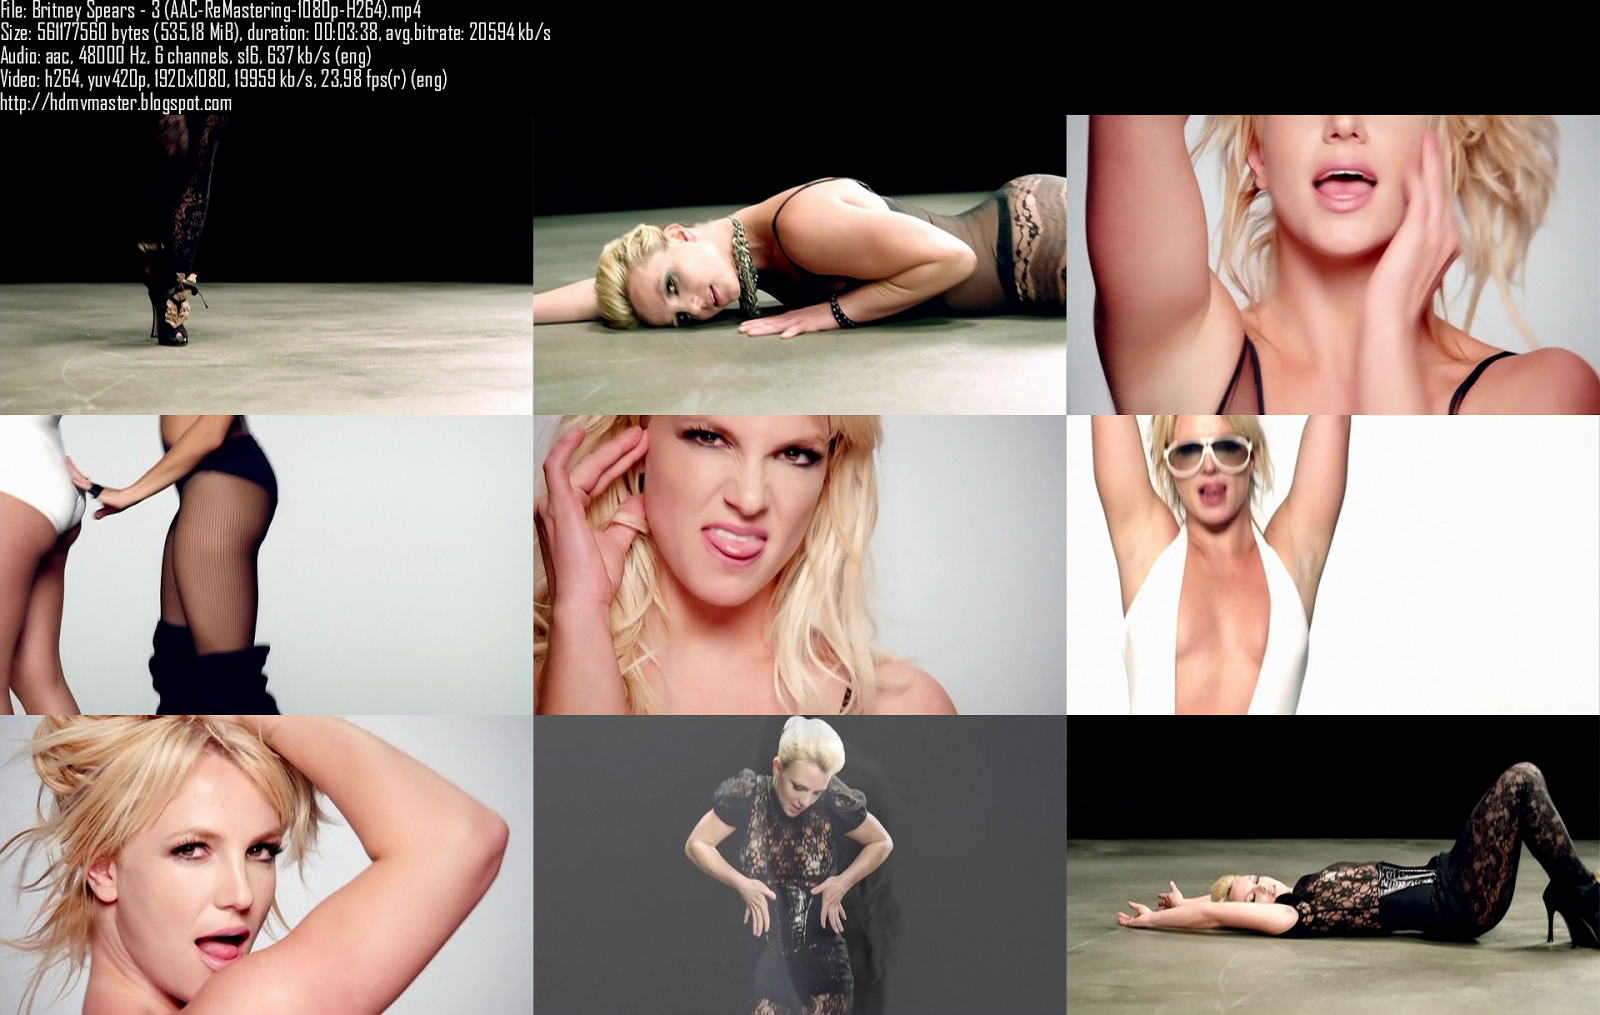 High Definition Music Video Britney Spears 3 Aac Remastering.